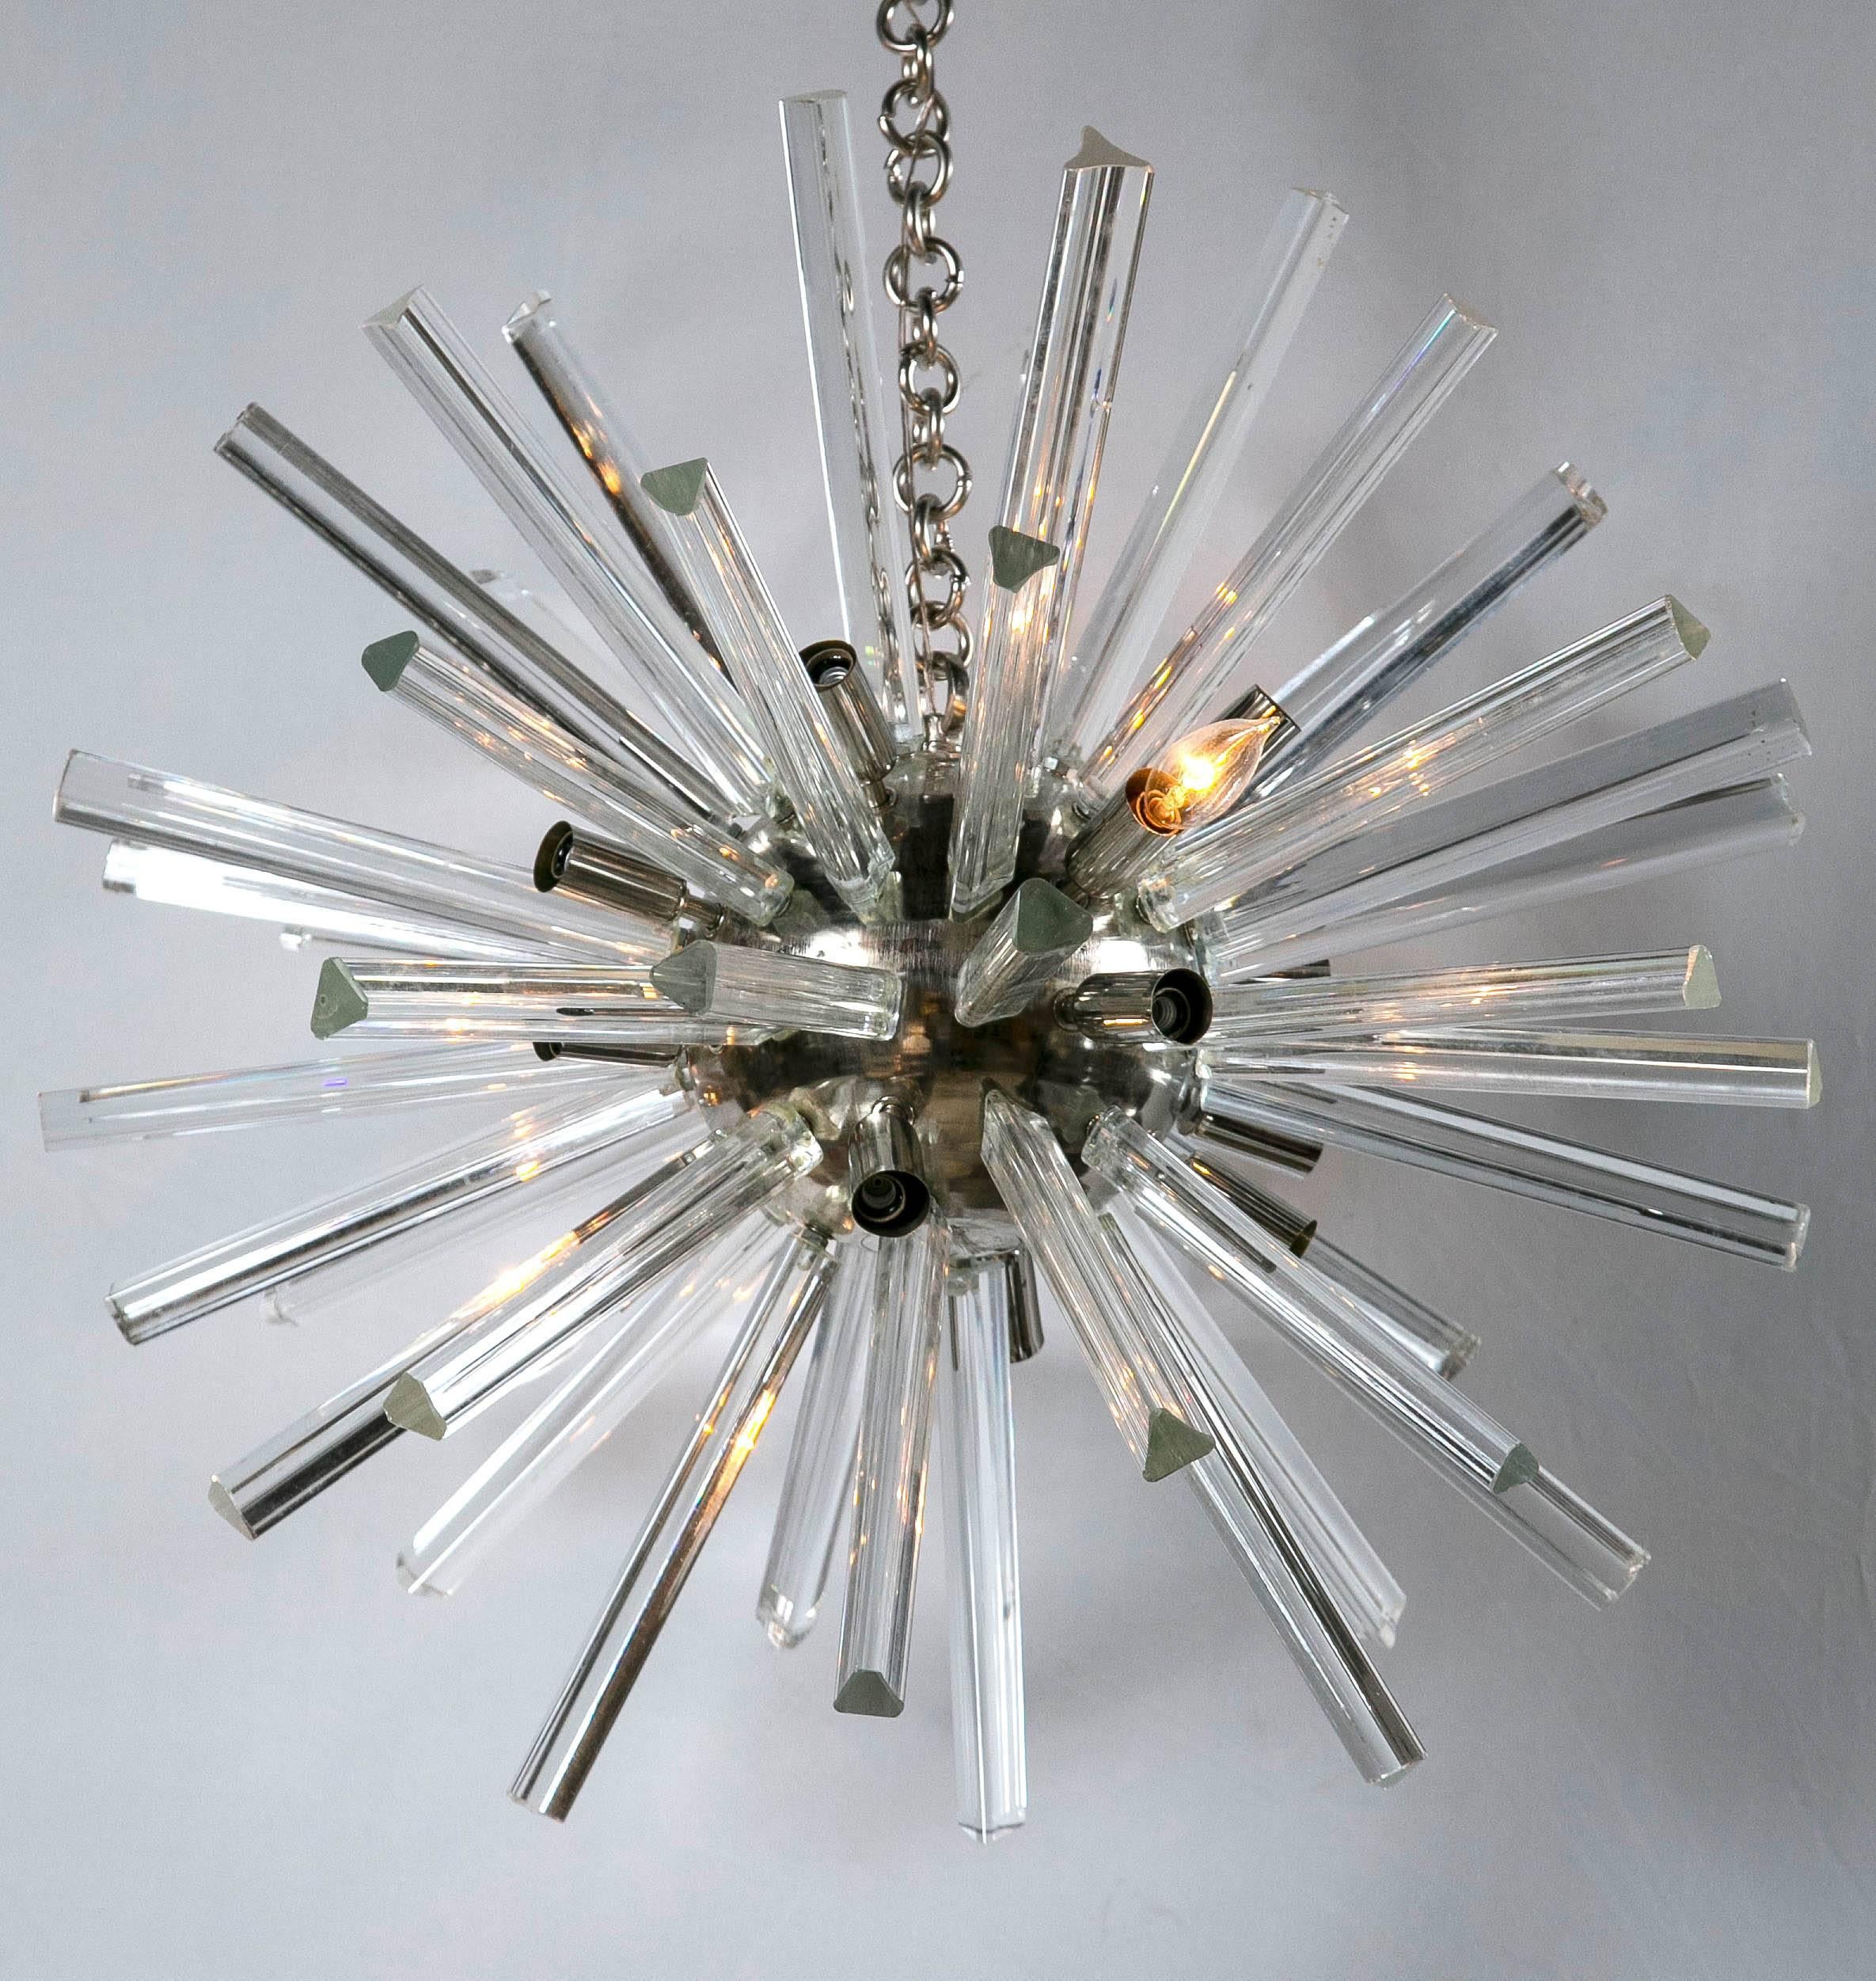 These Mid-Century Modern chrome spherically shaped centers have approx 48 crystals prisms flowing out from the center sphere to form a wonderfully decorative chandelier. The crystals are 10 inches long. The price is for one pair only. Matching